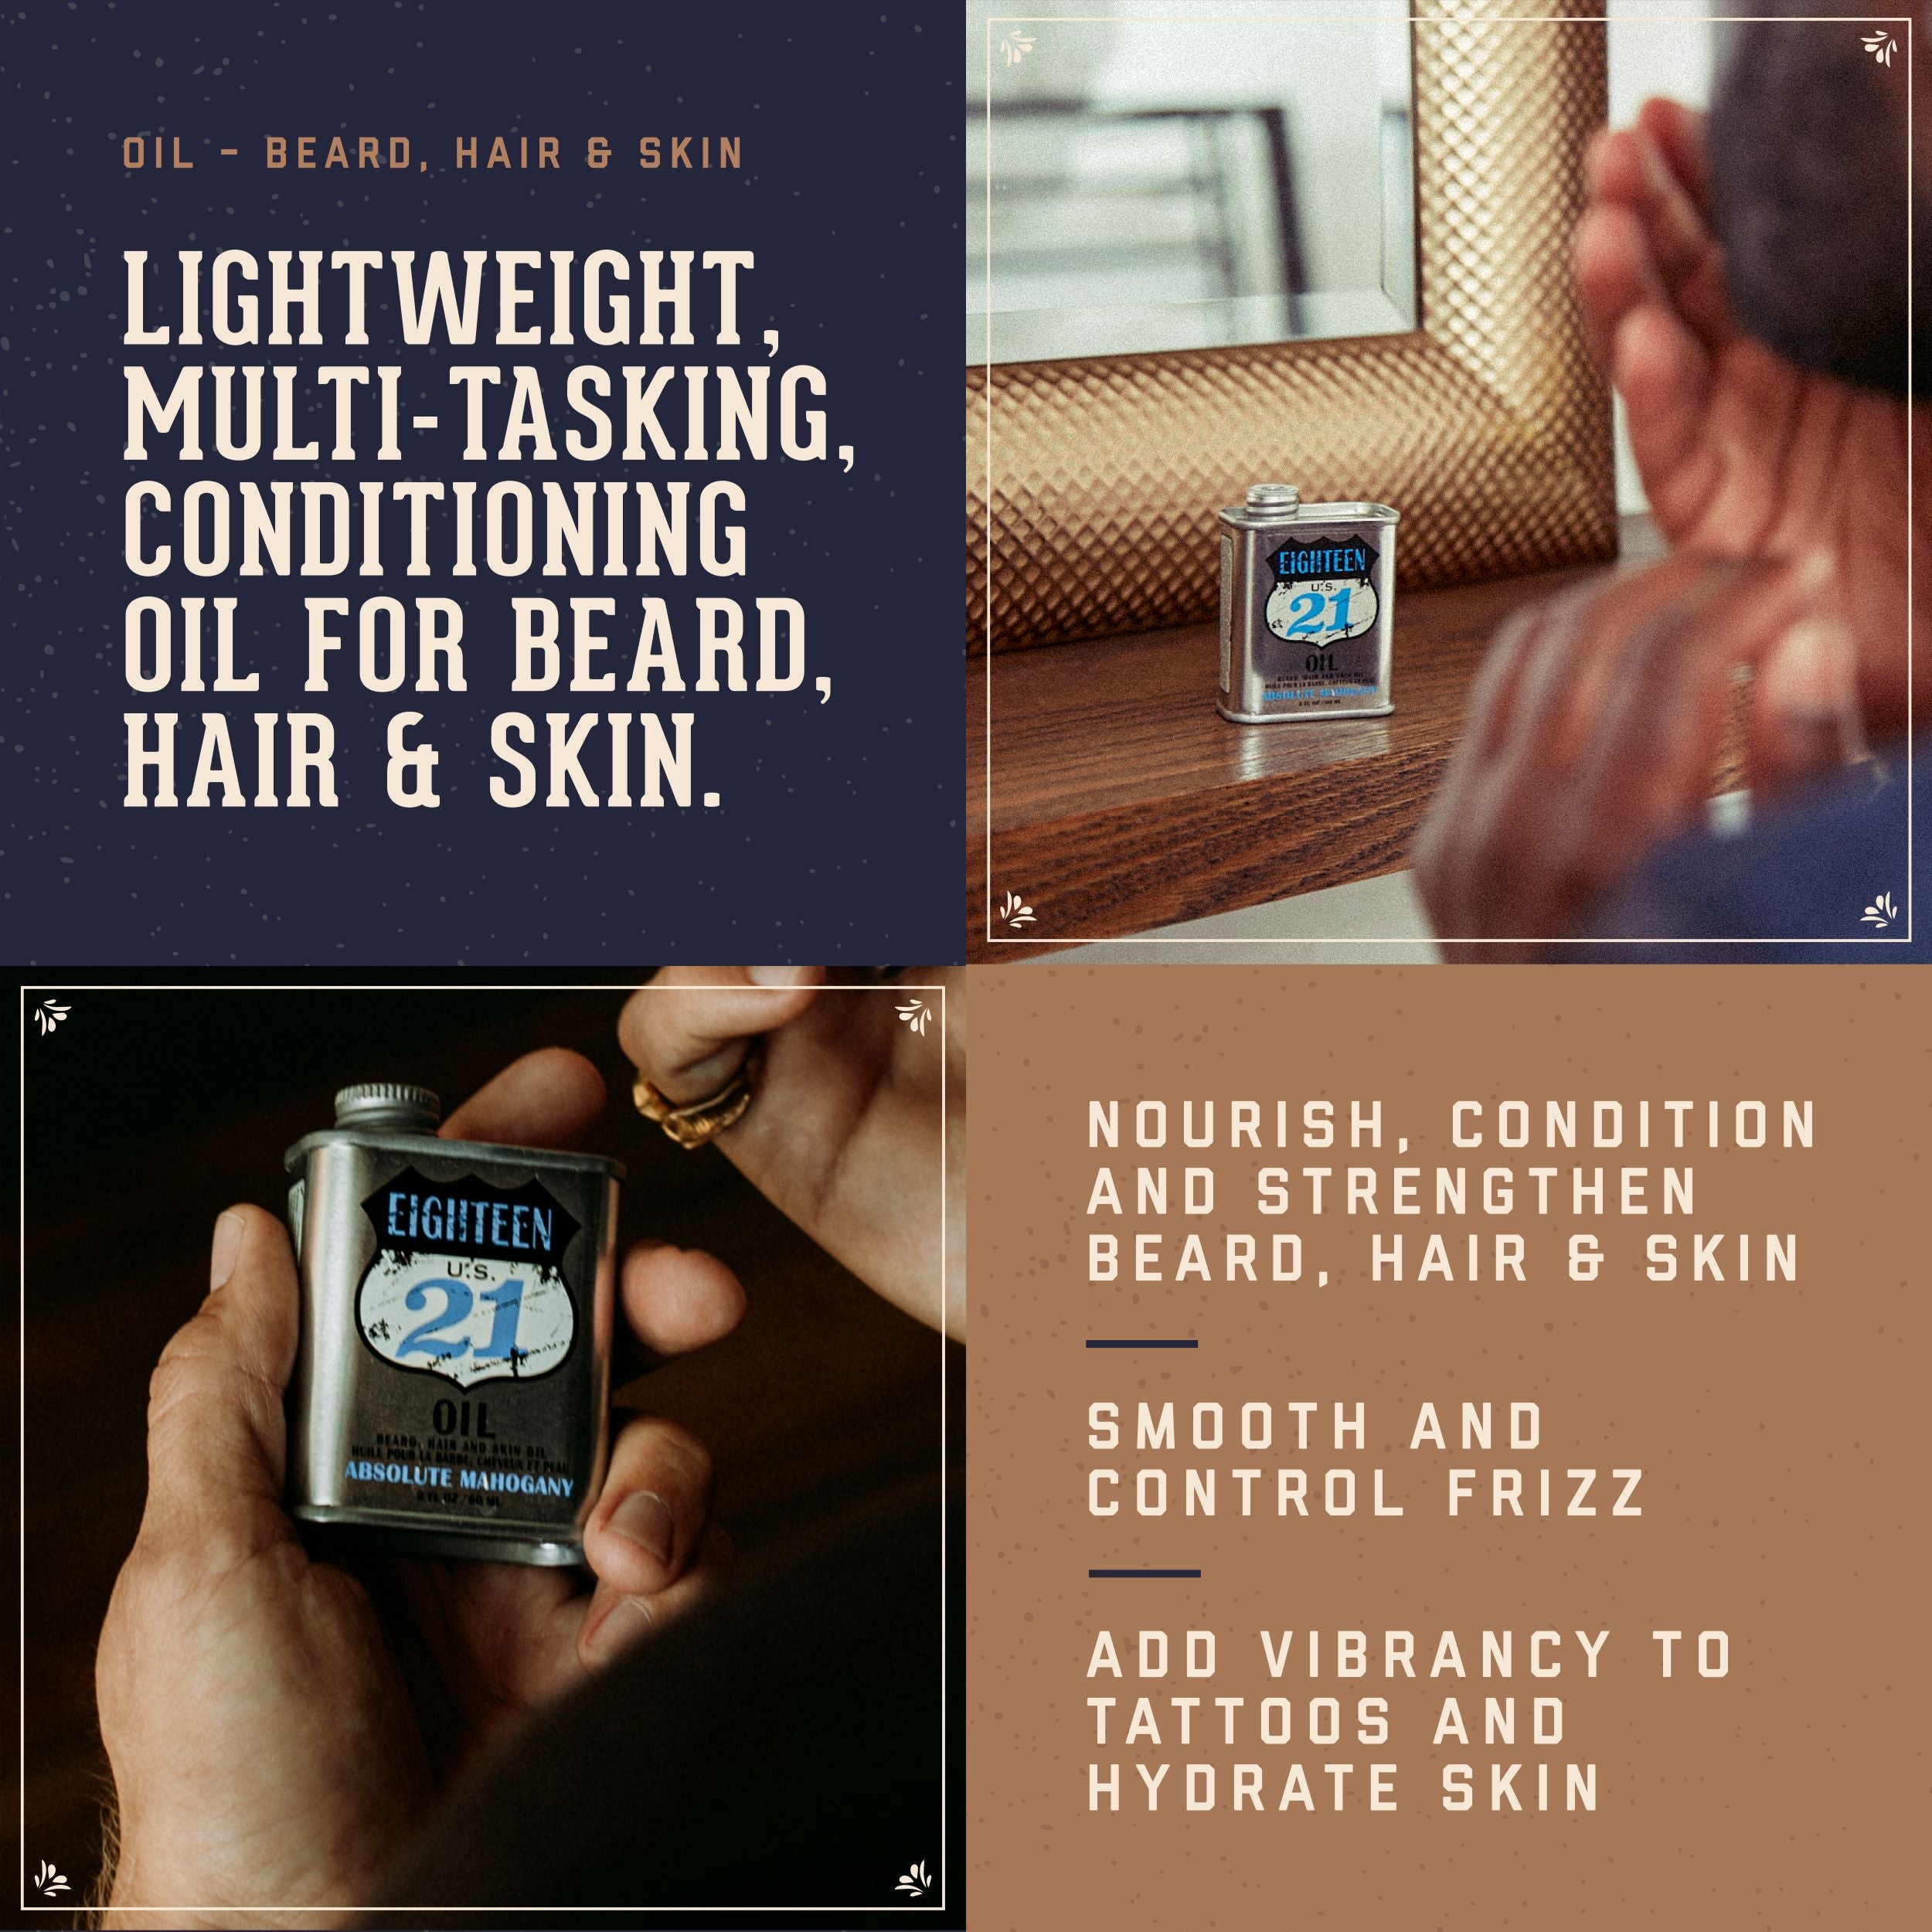 18.21 Man Made Absolute Mahogany oil Benefits. Leightweight, multi-tasking conditioning oil for beard, hair and skin. Nourish, condition and stregthen beard and hair. Smooth and control frizz. Add vibrancy to tatoos and hydrate skin.